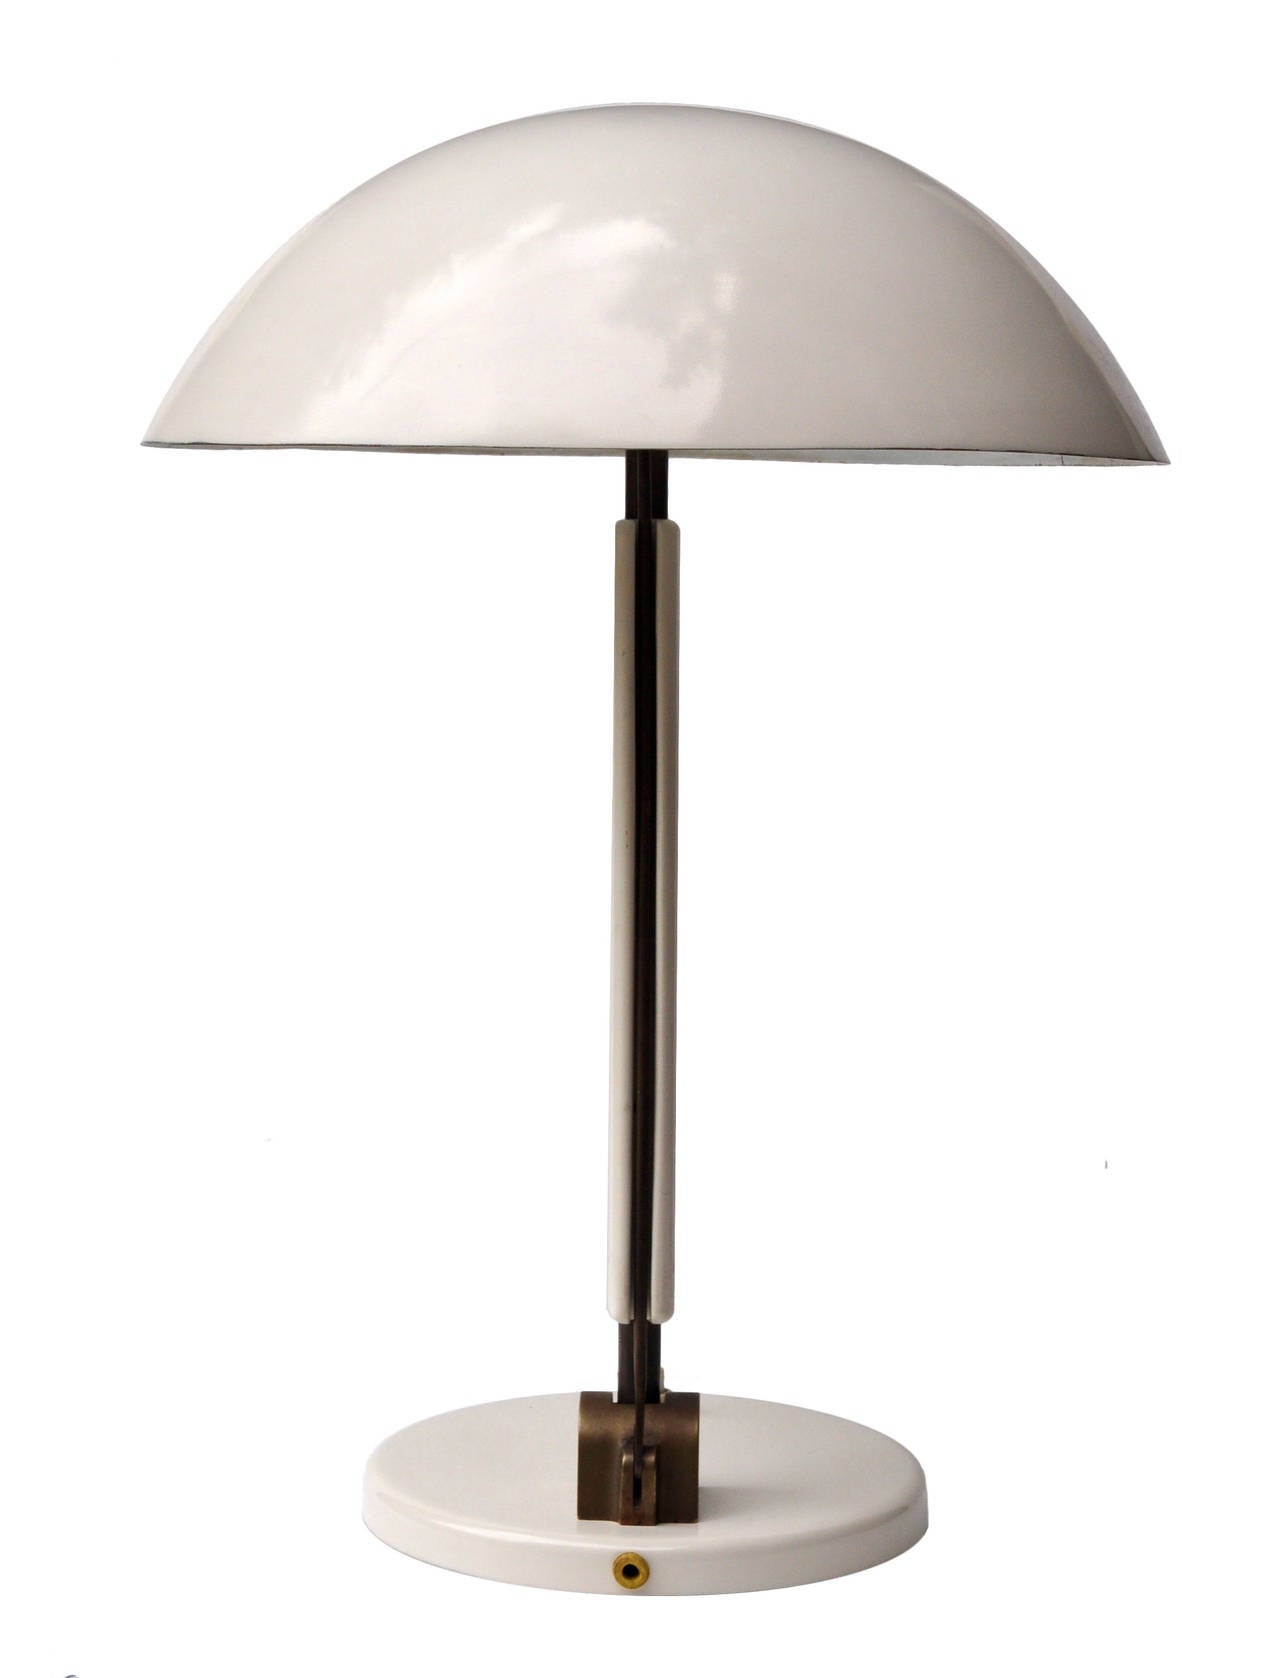 Modernist Desk Lamp, Switzerland, 1950s In Excellent Condition For Sale In Brooklyn, NY